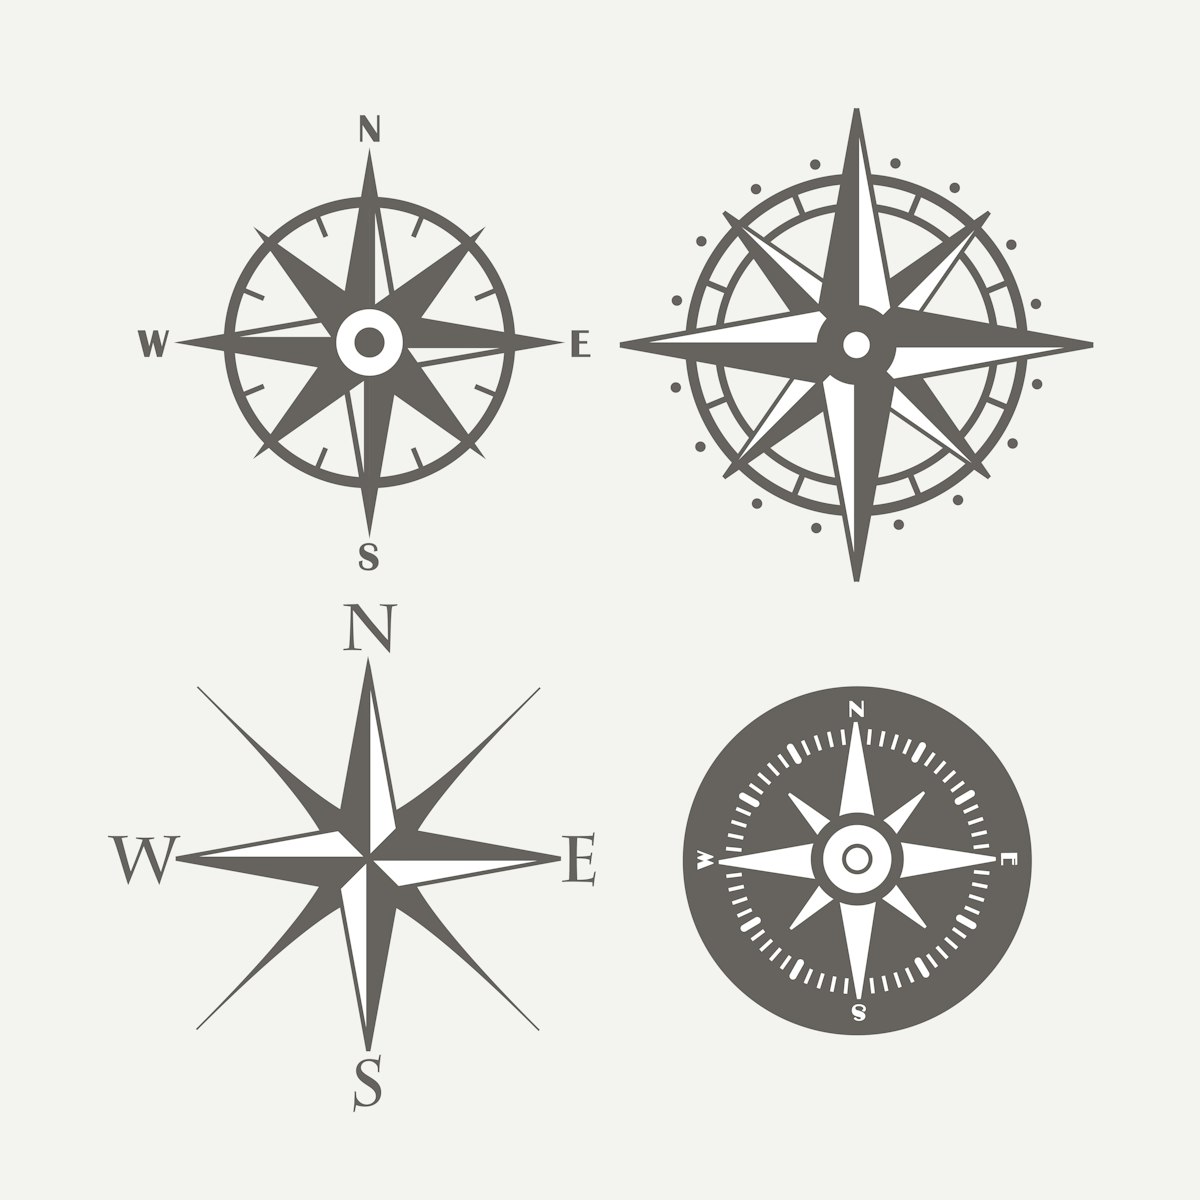 One cannot simply rely on modern technology all the time, a good sailor should know how to use an old-school compass.